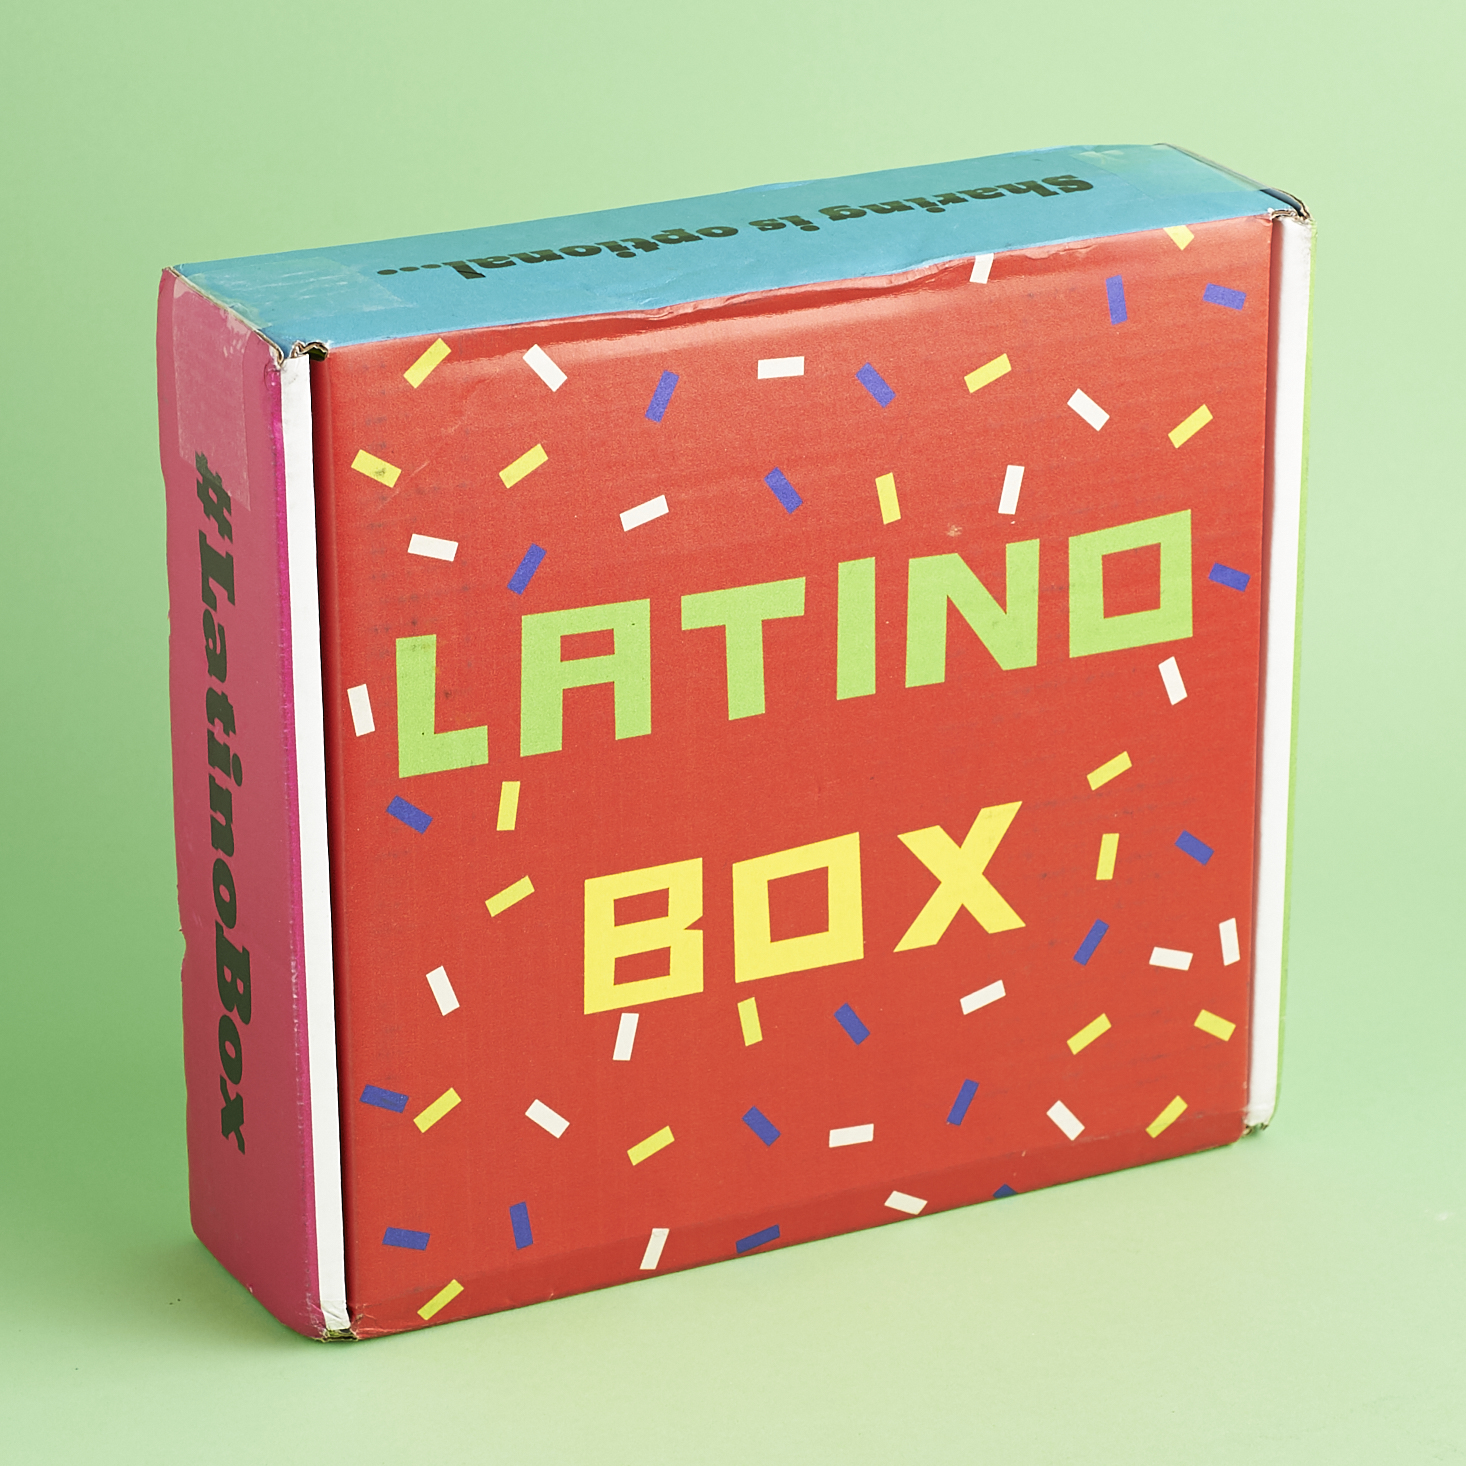 Check out our review of the February 2017 Latino Box!